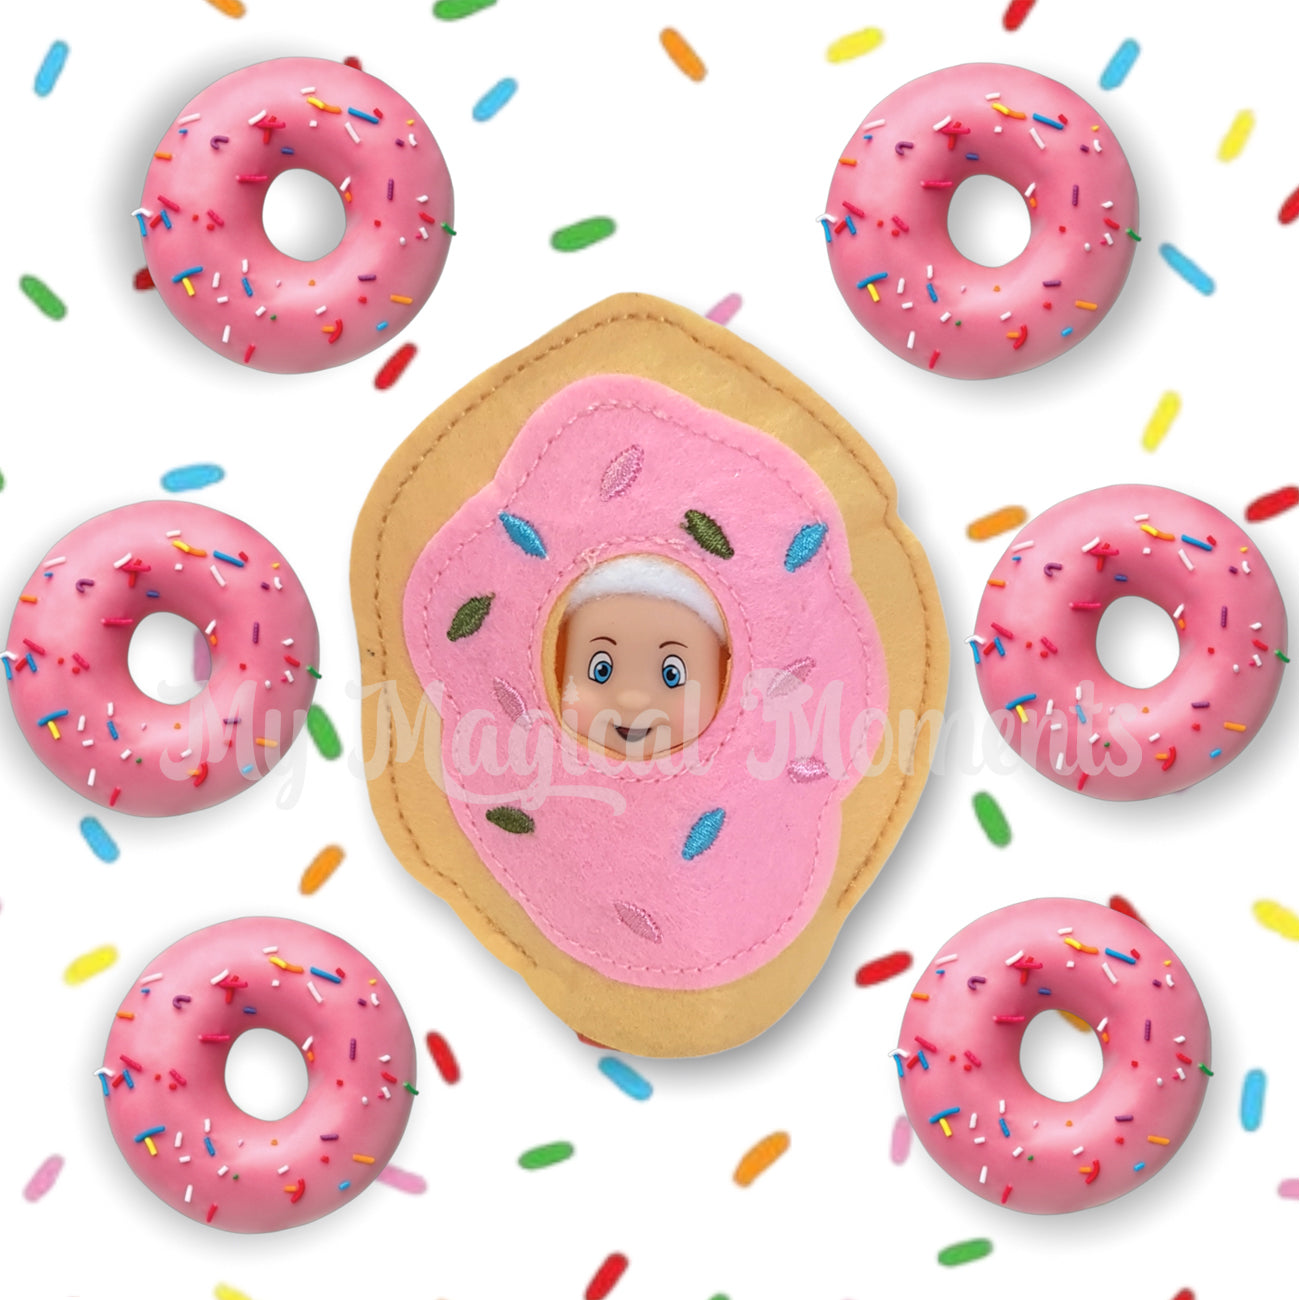 Baby elf wearing a donut costume surrounded by donuts